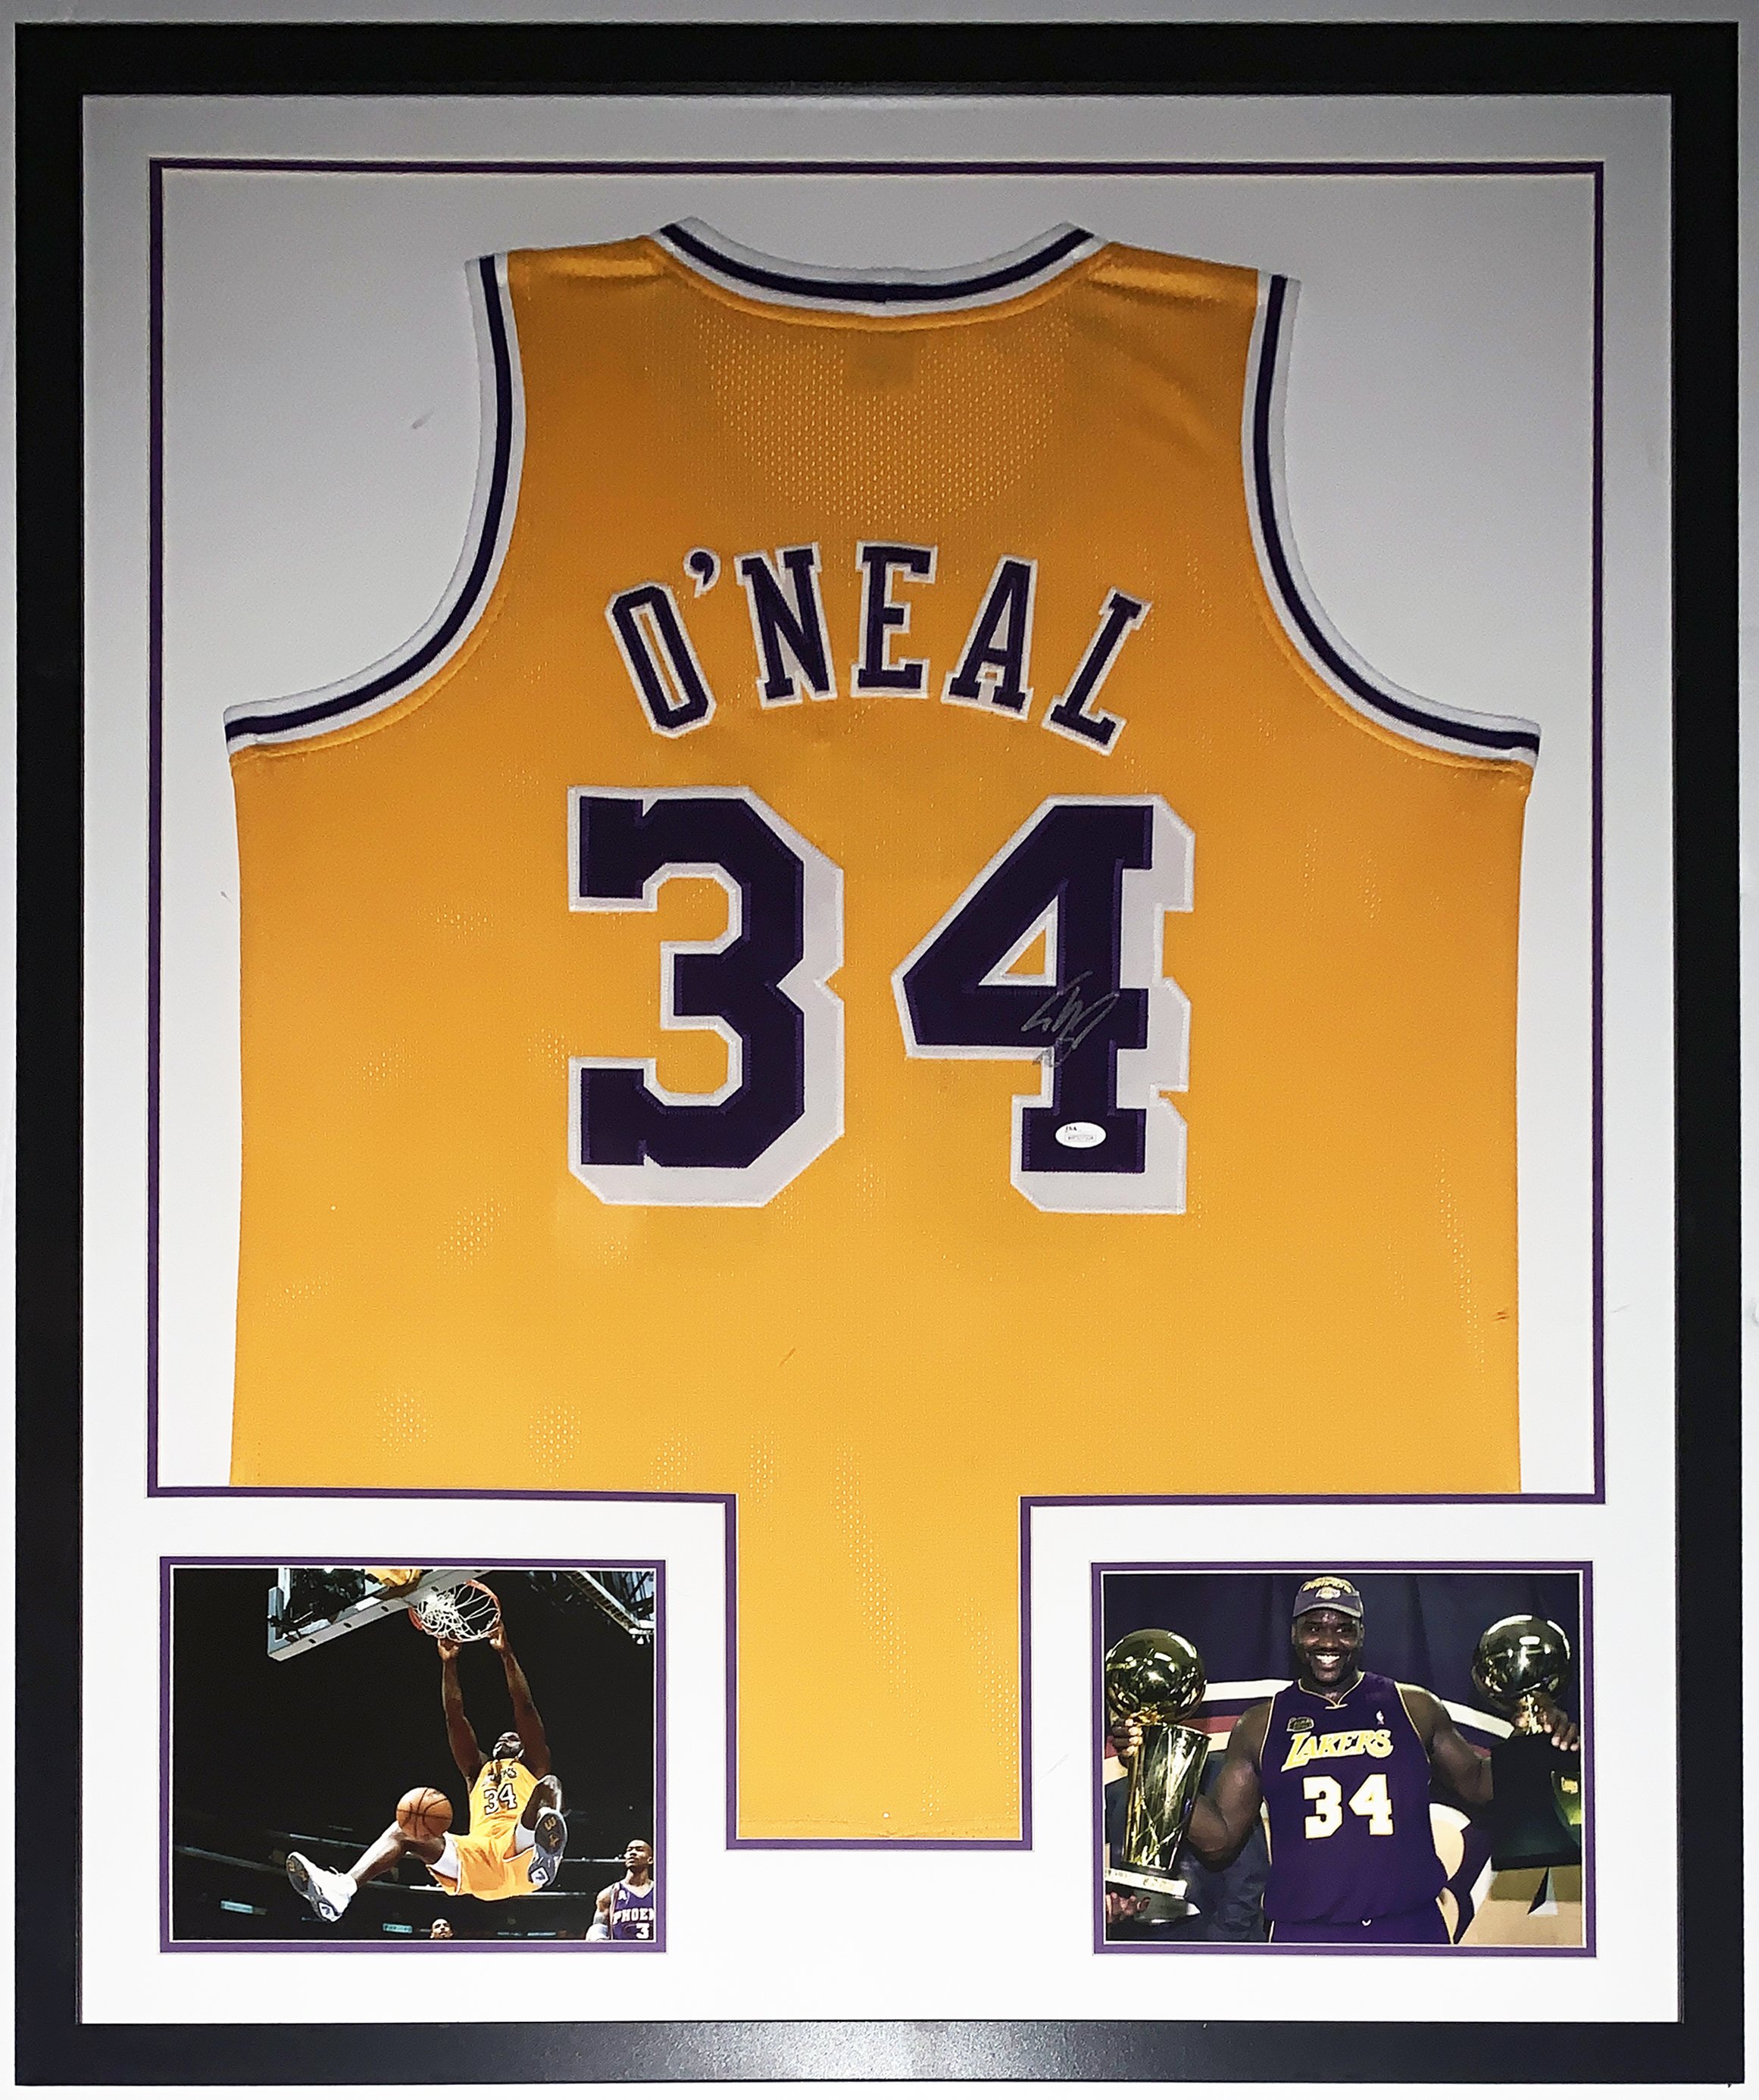 Bleachers Sports Music & Framing — Shaquille O'Neal Signed Los Angeles  Lakers Jersey - JSA COA Authenticated - Professionally Framed